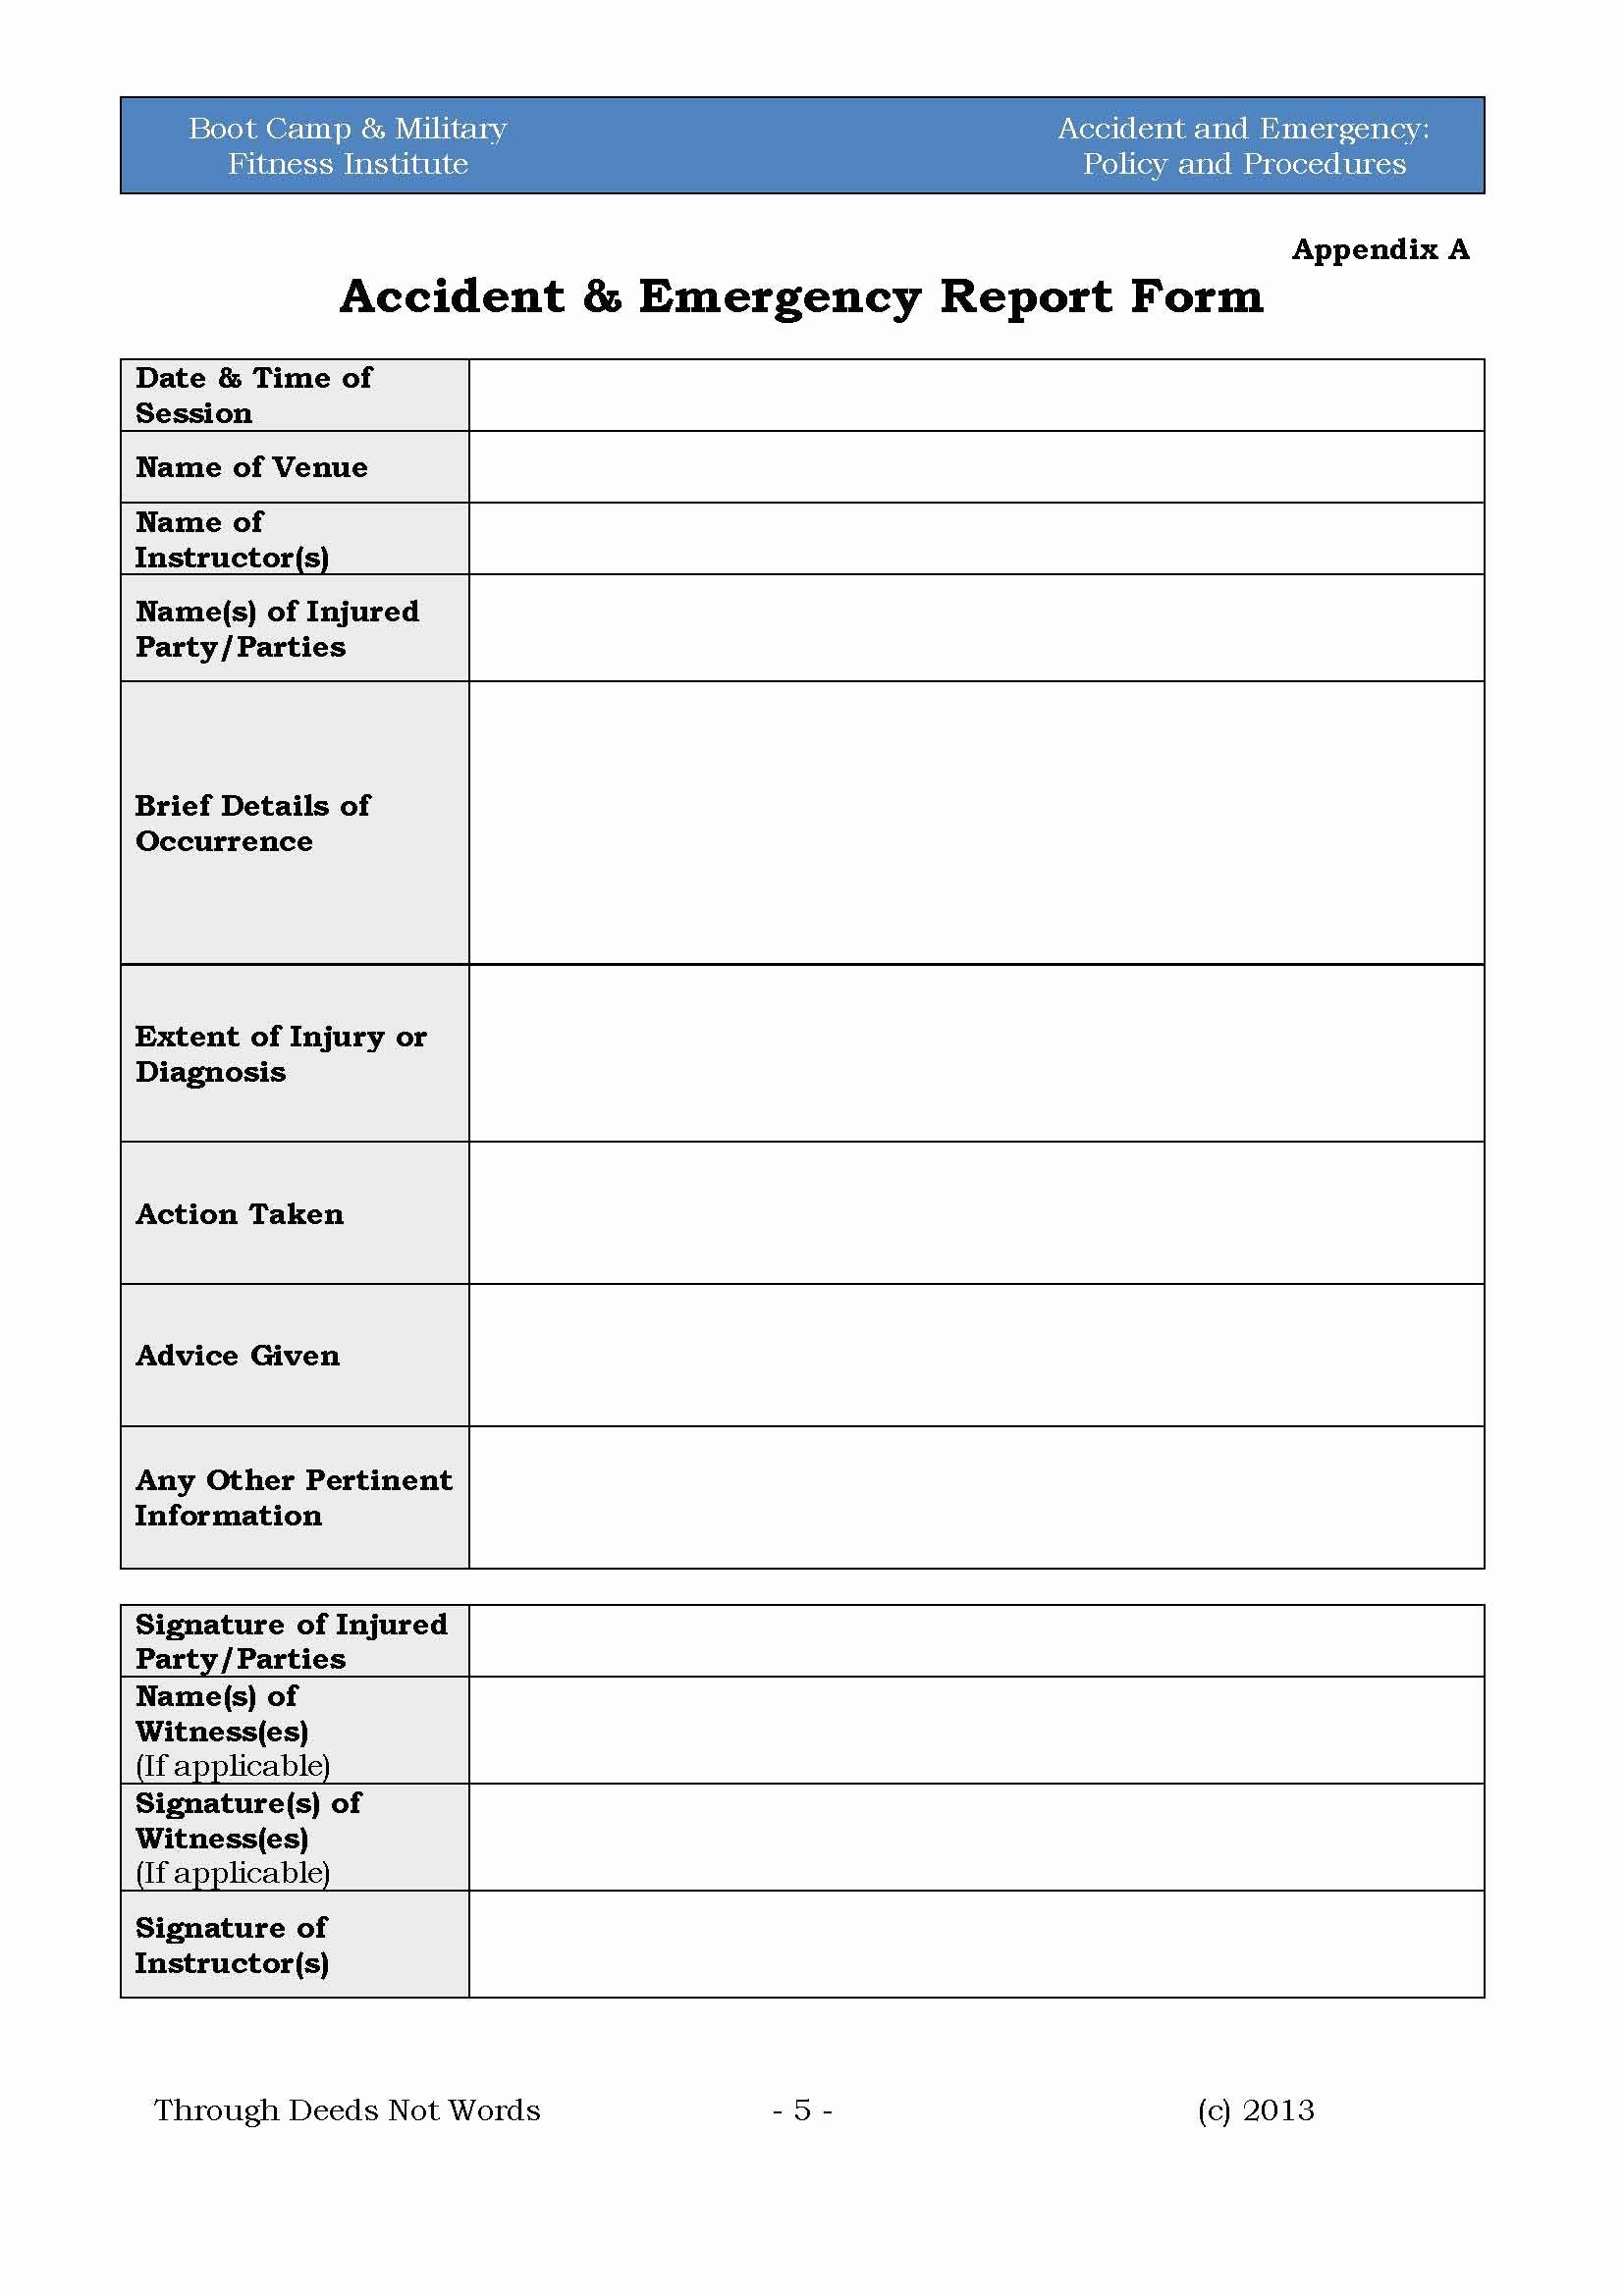 Accident Incident Reporting form Template Best Of Accident &amp; Emergency Policy &amp; Procedures – Boot Camp